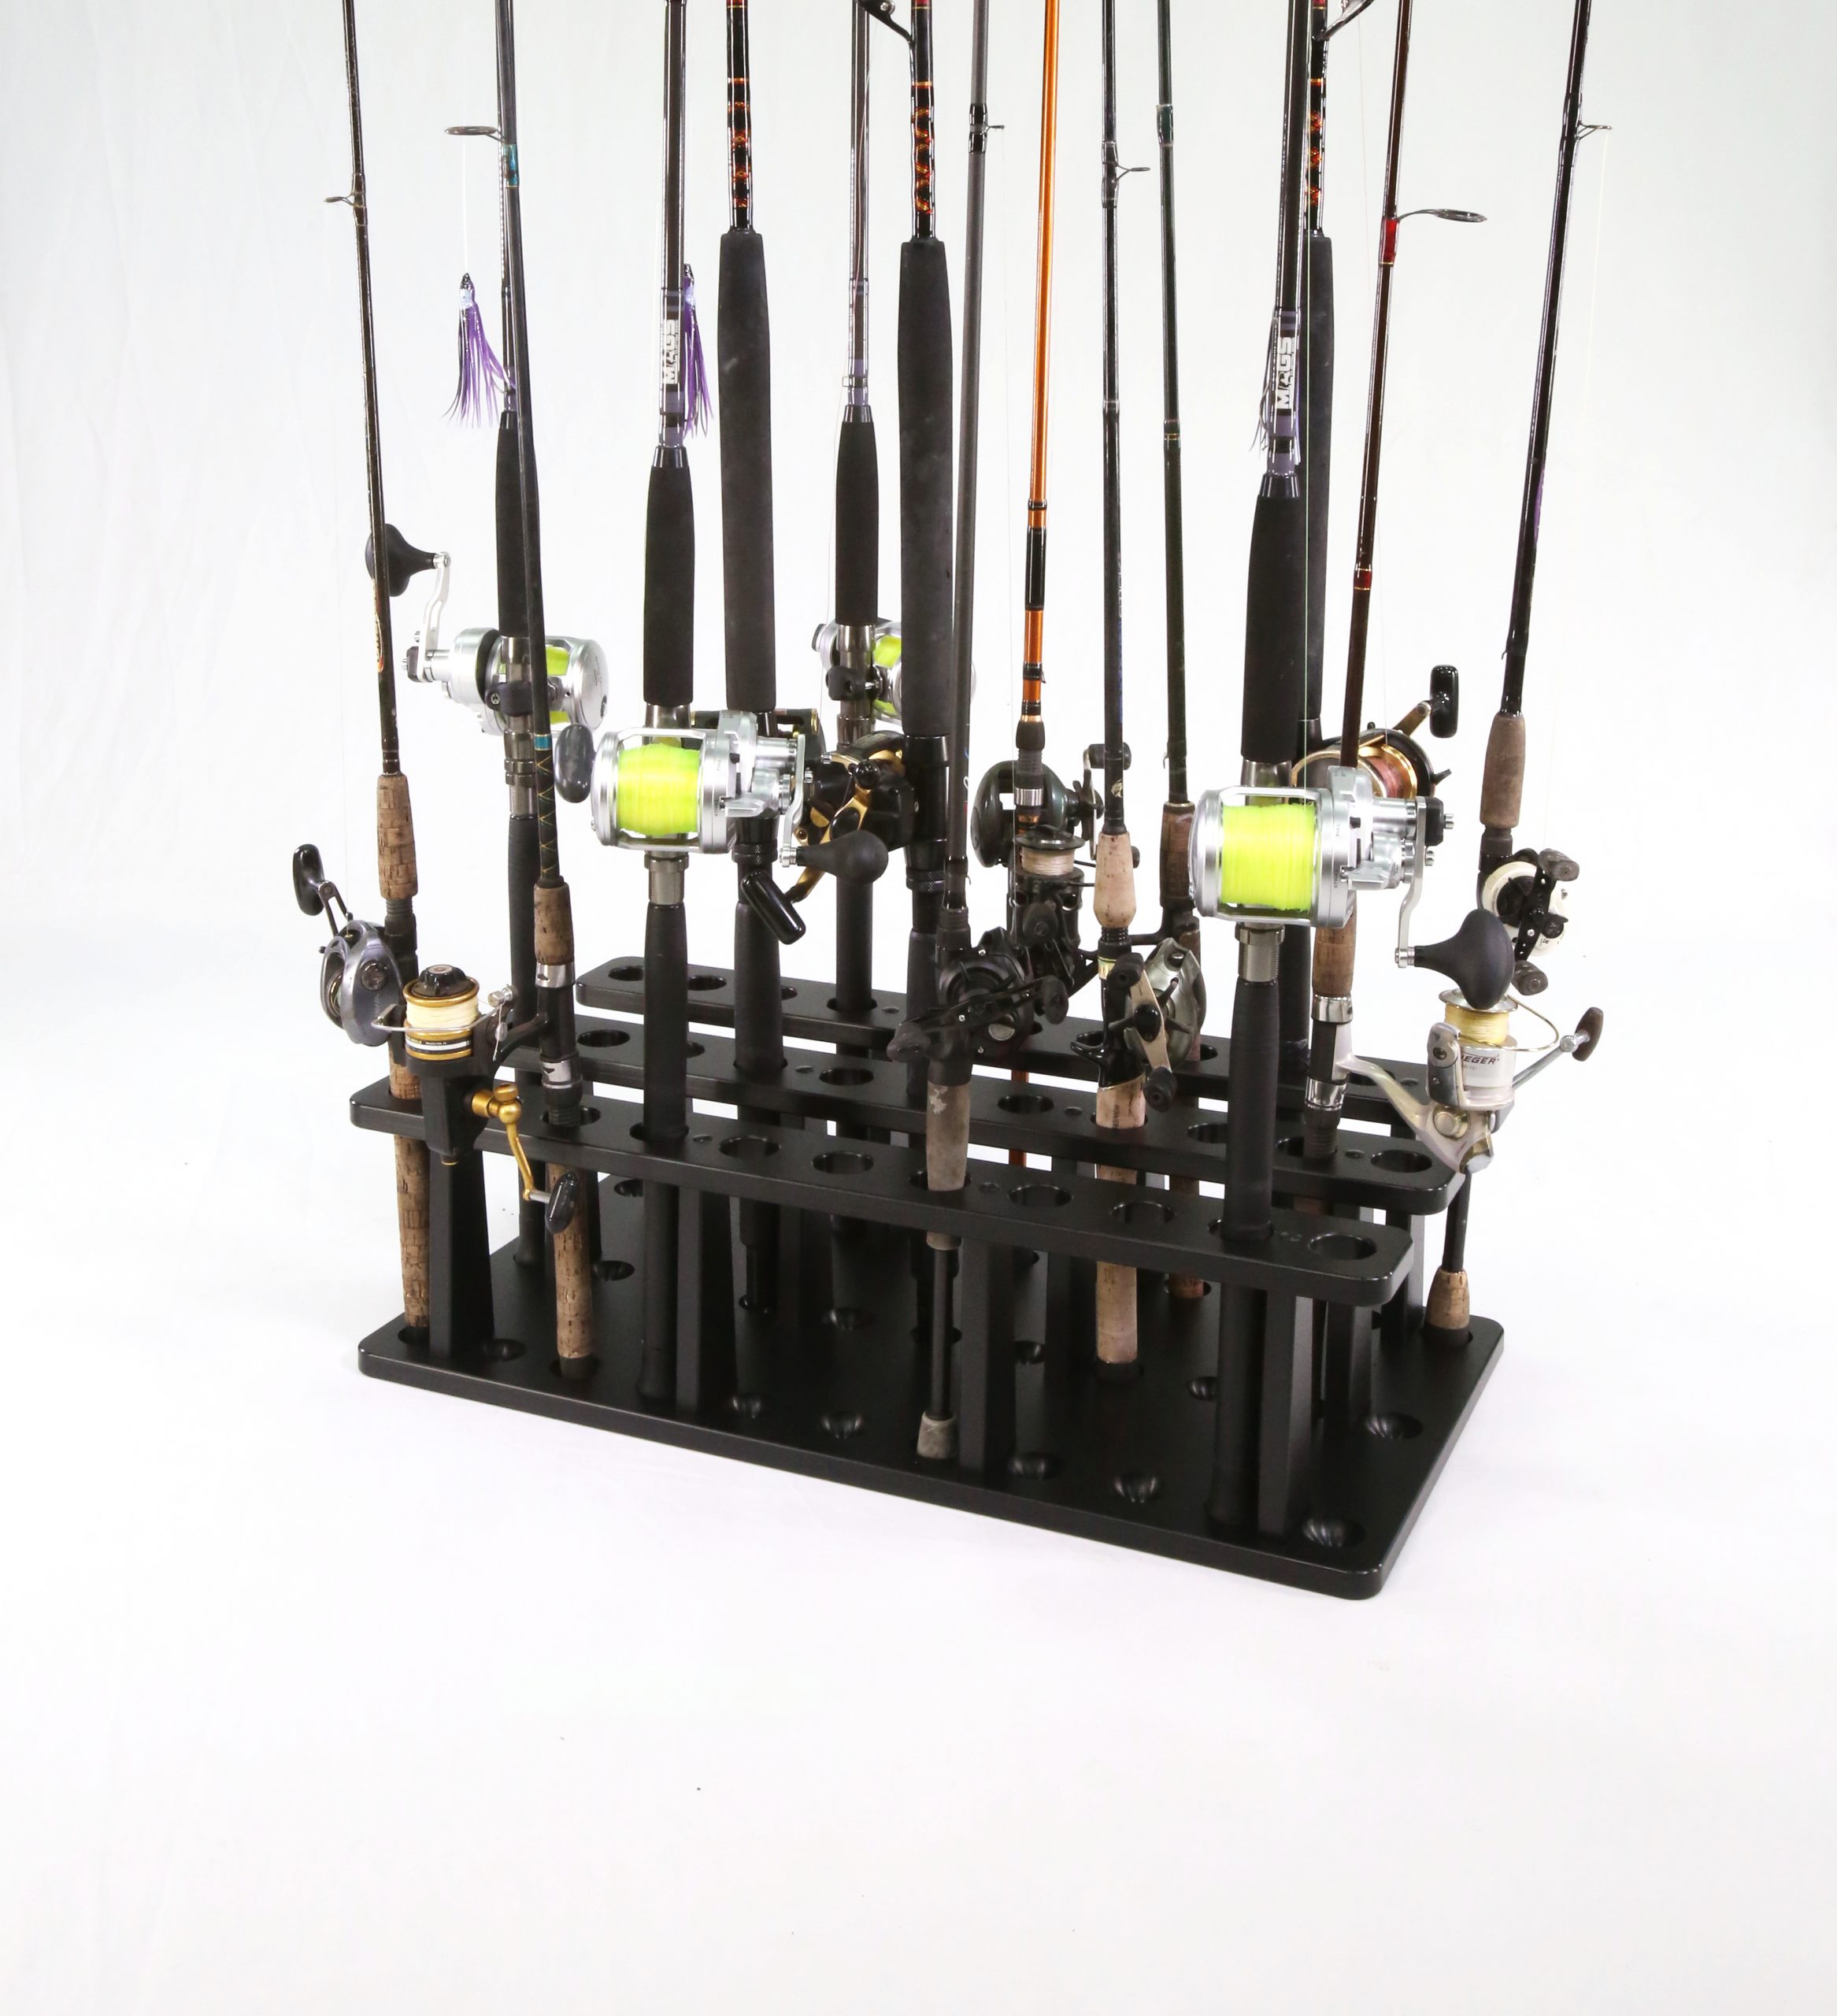 Fishing Rod Rack for 33 Conventional and Spinner Rods and Reels